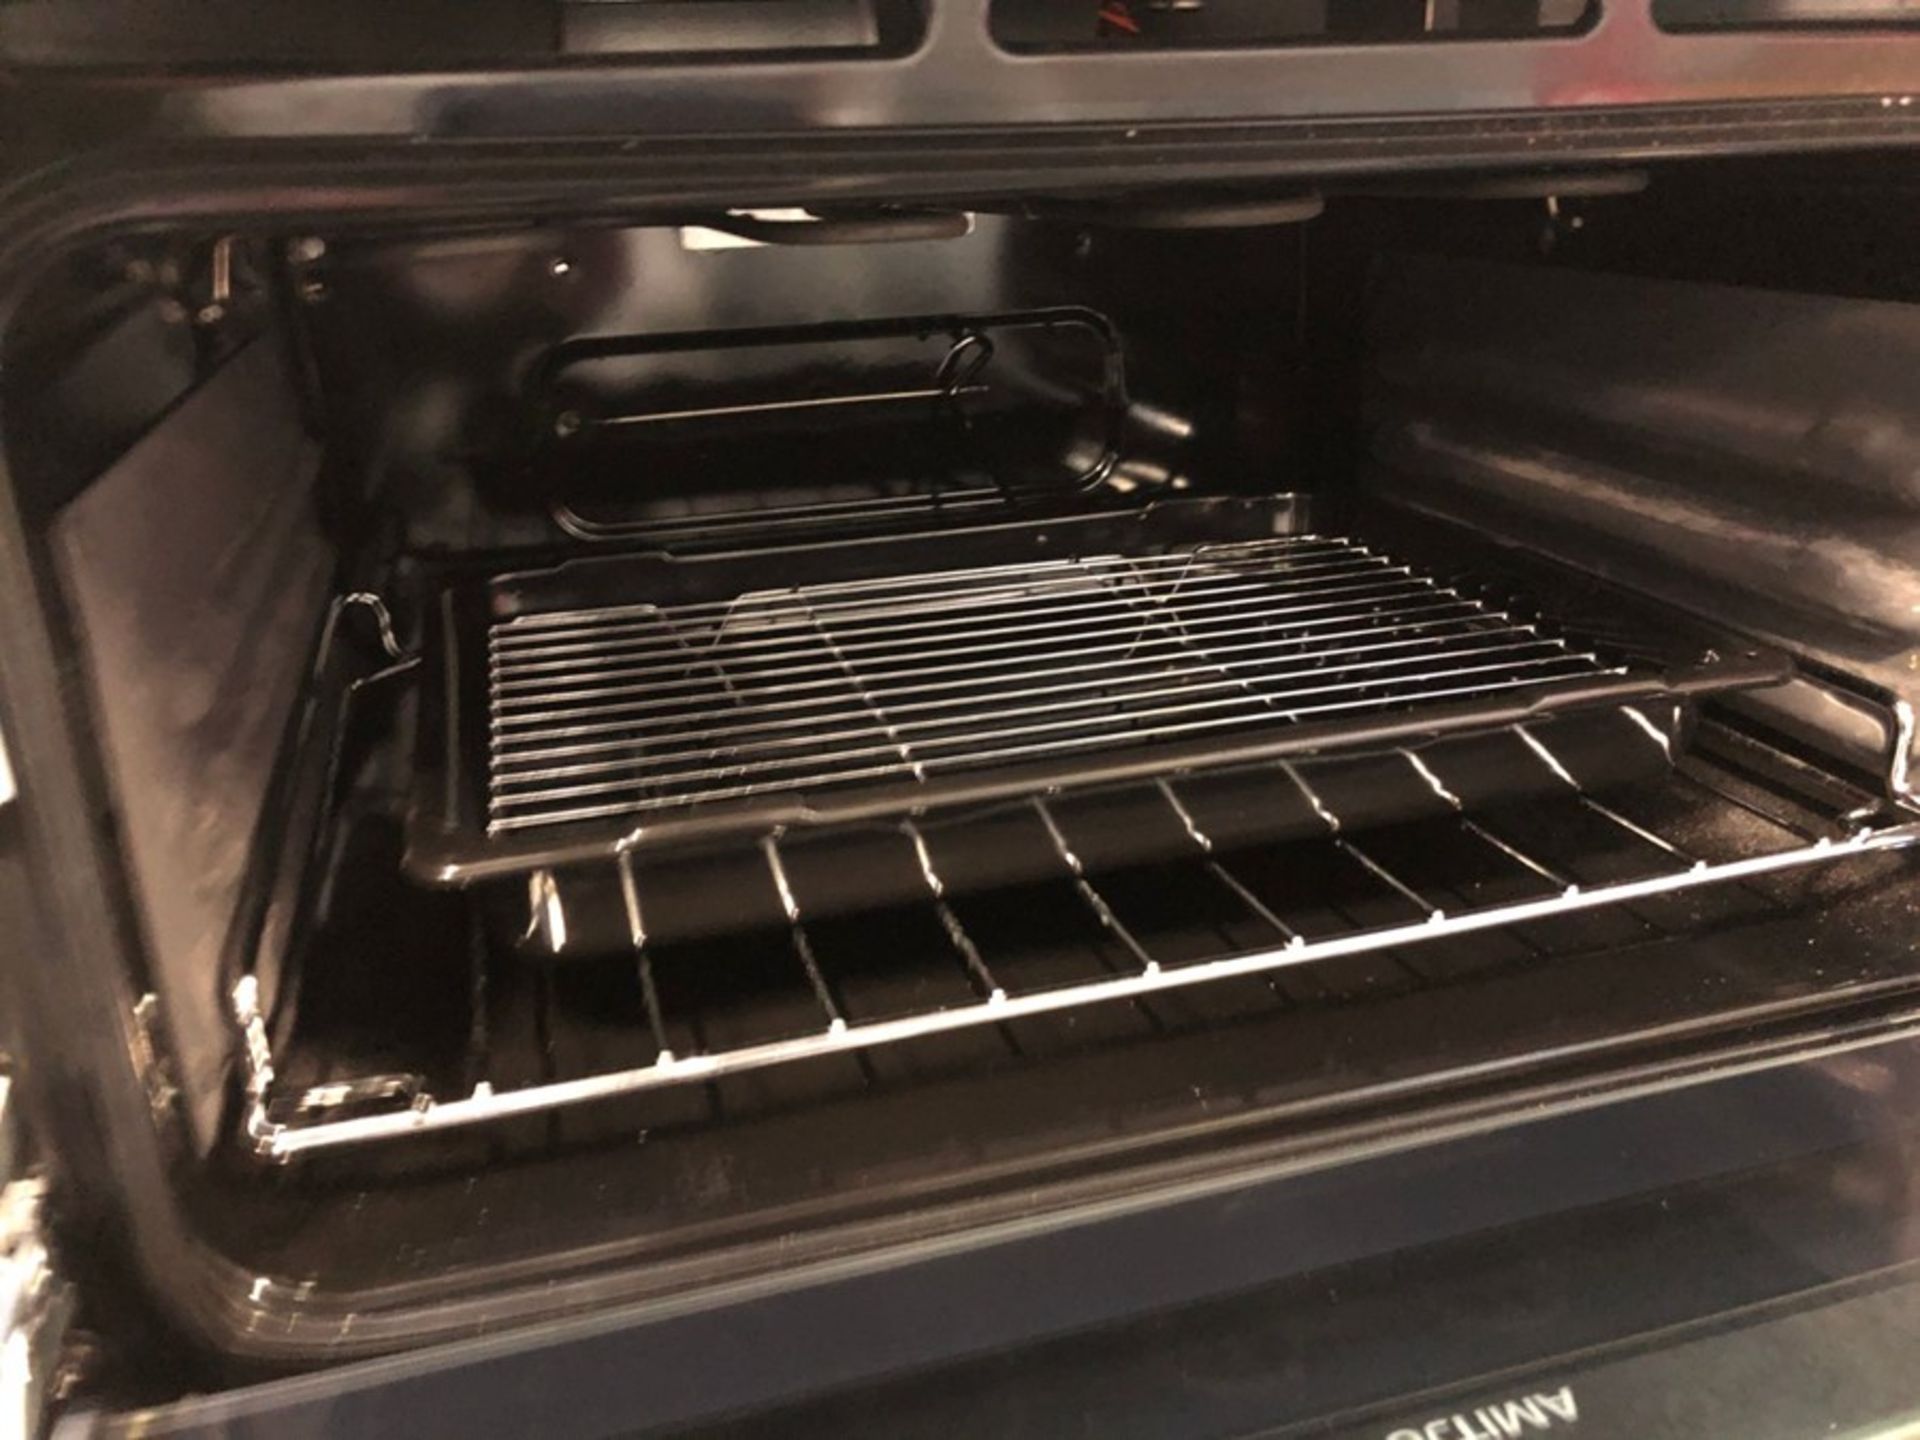 HOTPOINT 60CM DOUBLE OVEN ELECTRIC COOKER - HUE61X S / RRP £489.99 / UNTESTED, LIGHTLY USED. VERY - Image 2 of 3